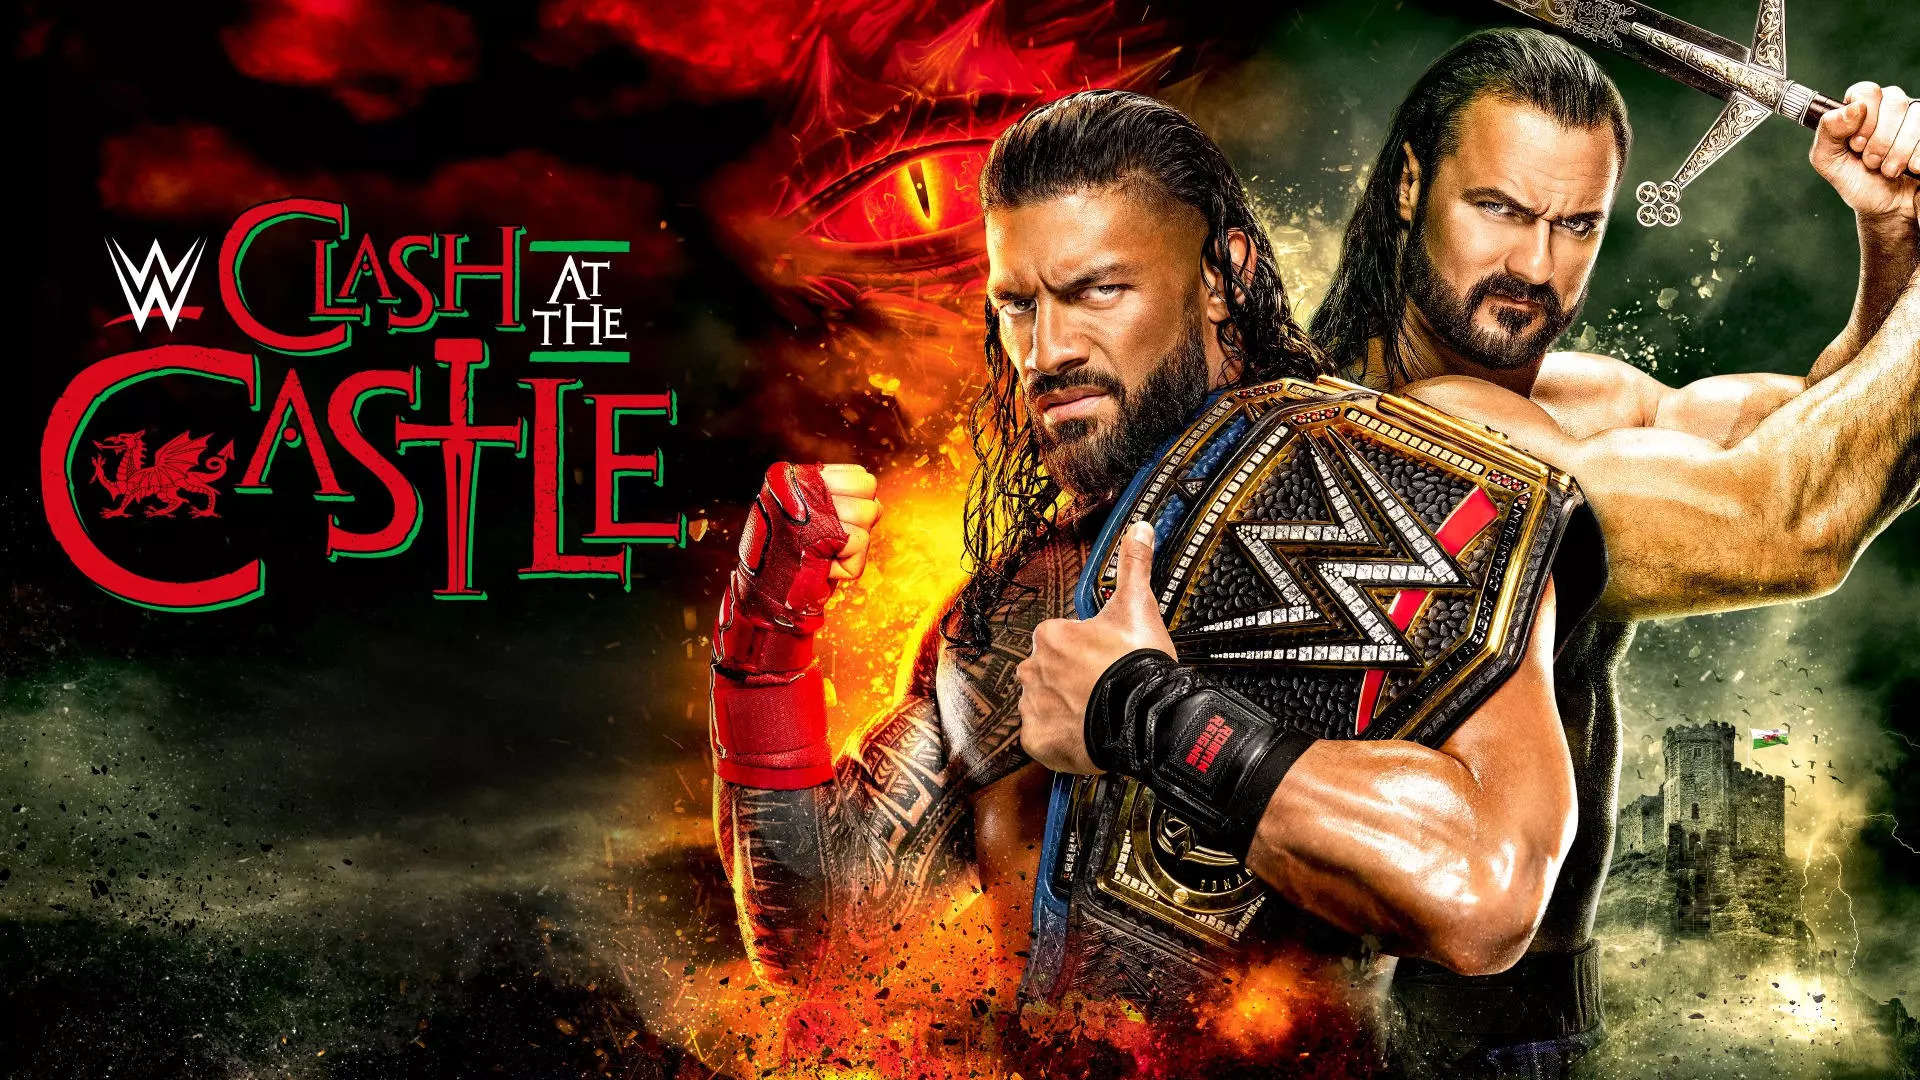 WWE Clash at the Castle updated match card details superstars in action - All you need to know